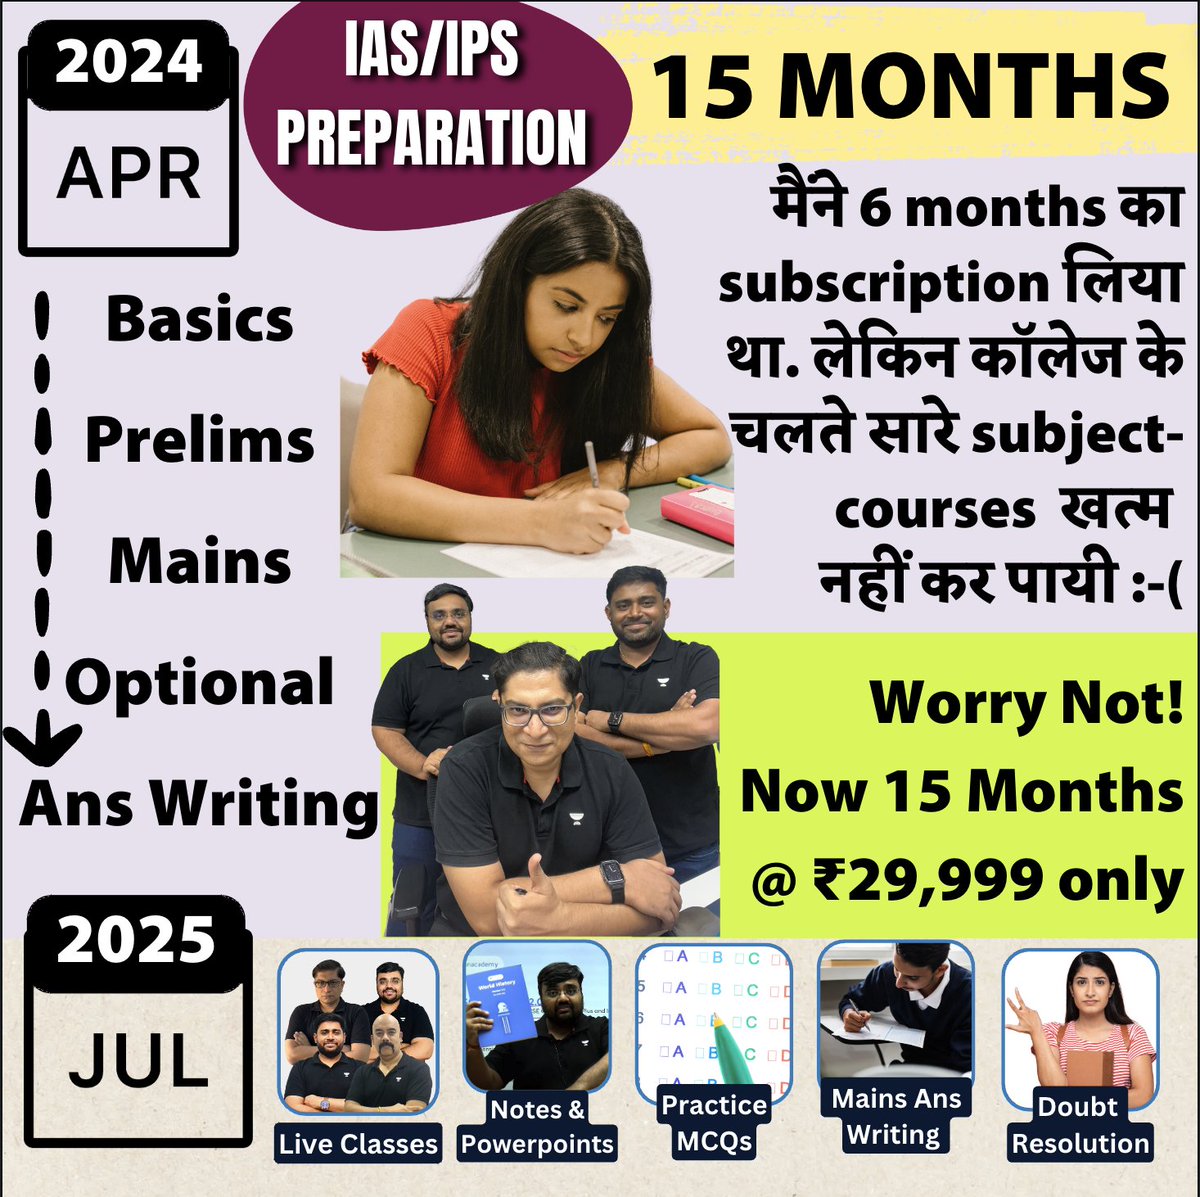 🚨 Celebrates 21st April Civil Services Day 

📉 With Lowest Ever Prices for UPSC Coaching at Unacademy 

 ₹29,999/- for 15 months 

🧑🏻‍🏫 Comprehensive preparation for prelims mains CSAT, mocks and answer writing. 

Click me to join! unacademy.com/goal/upsc-opti…